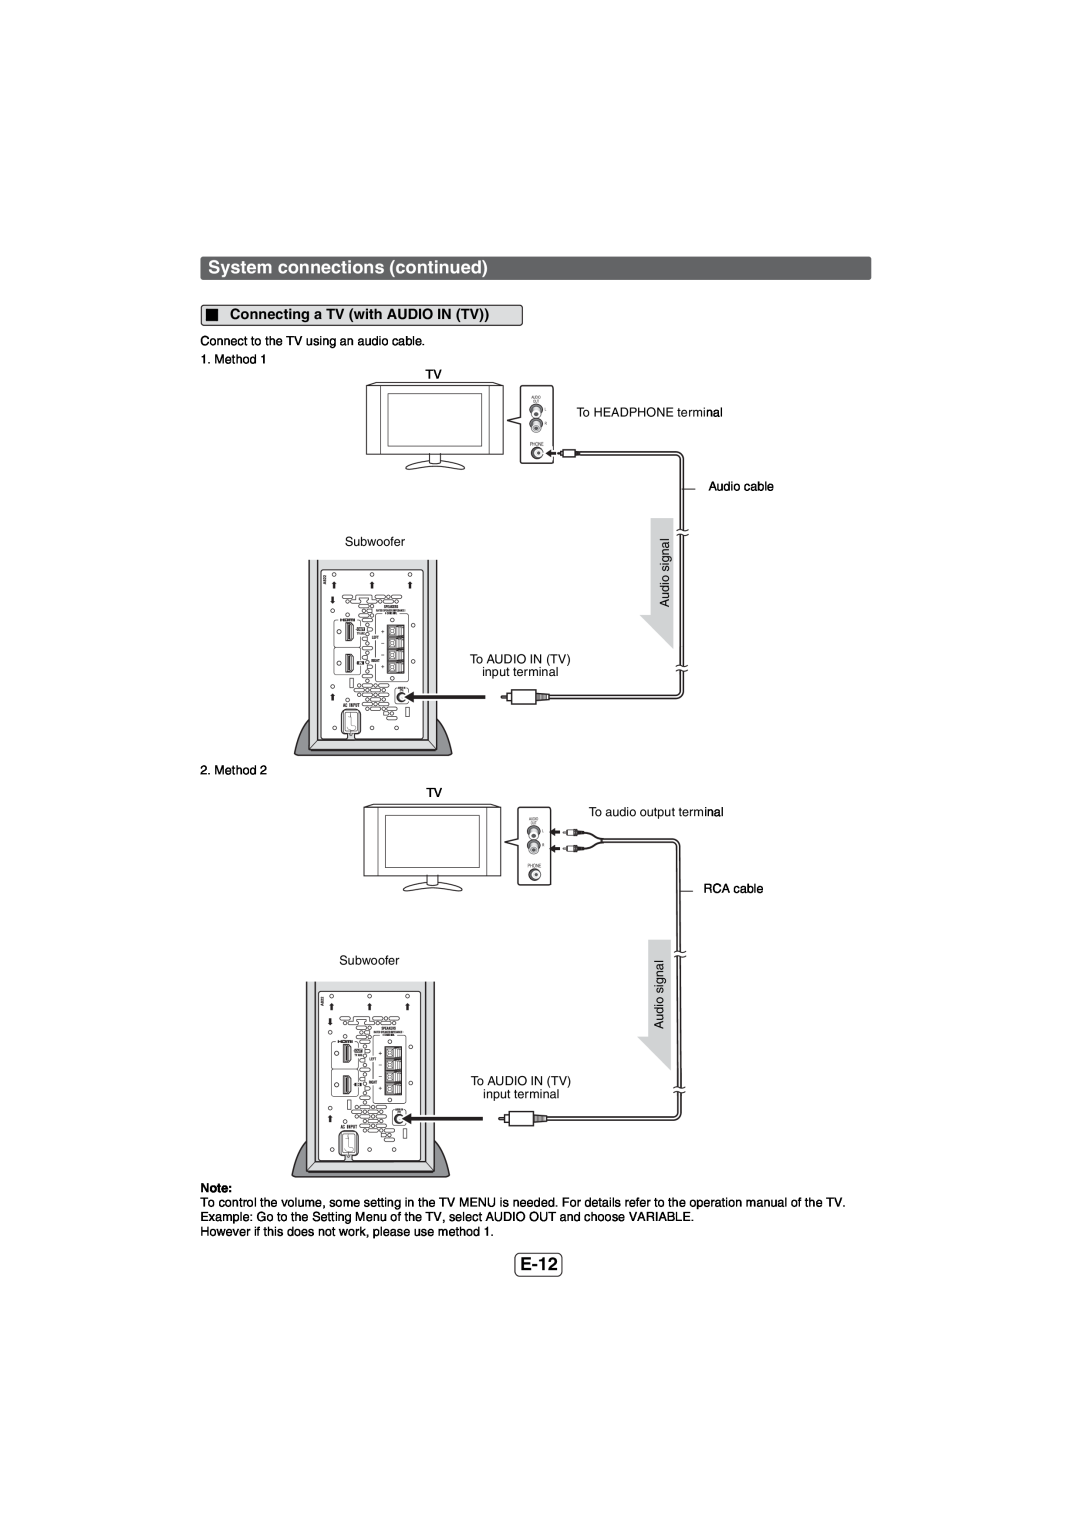 Sharp HT-SL50 operation manual E-12, Connecting a TV with AUDIO IN TV, System connections continued 